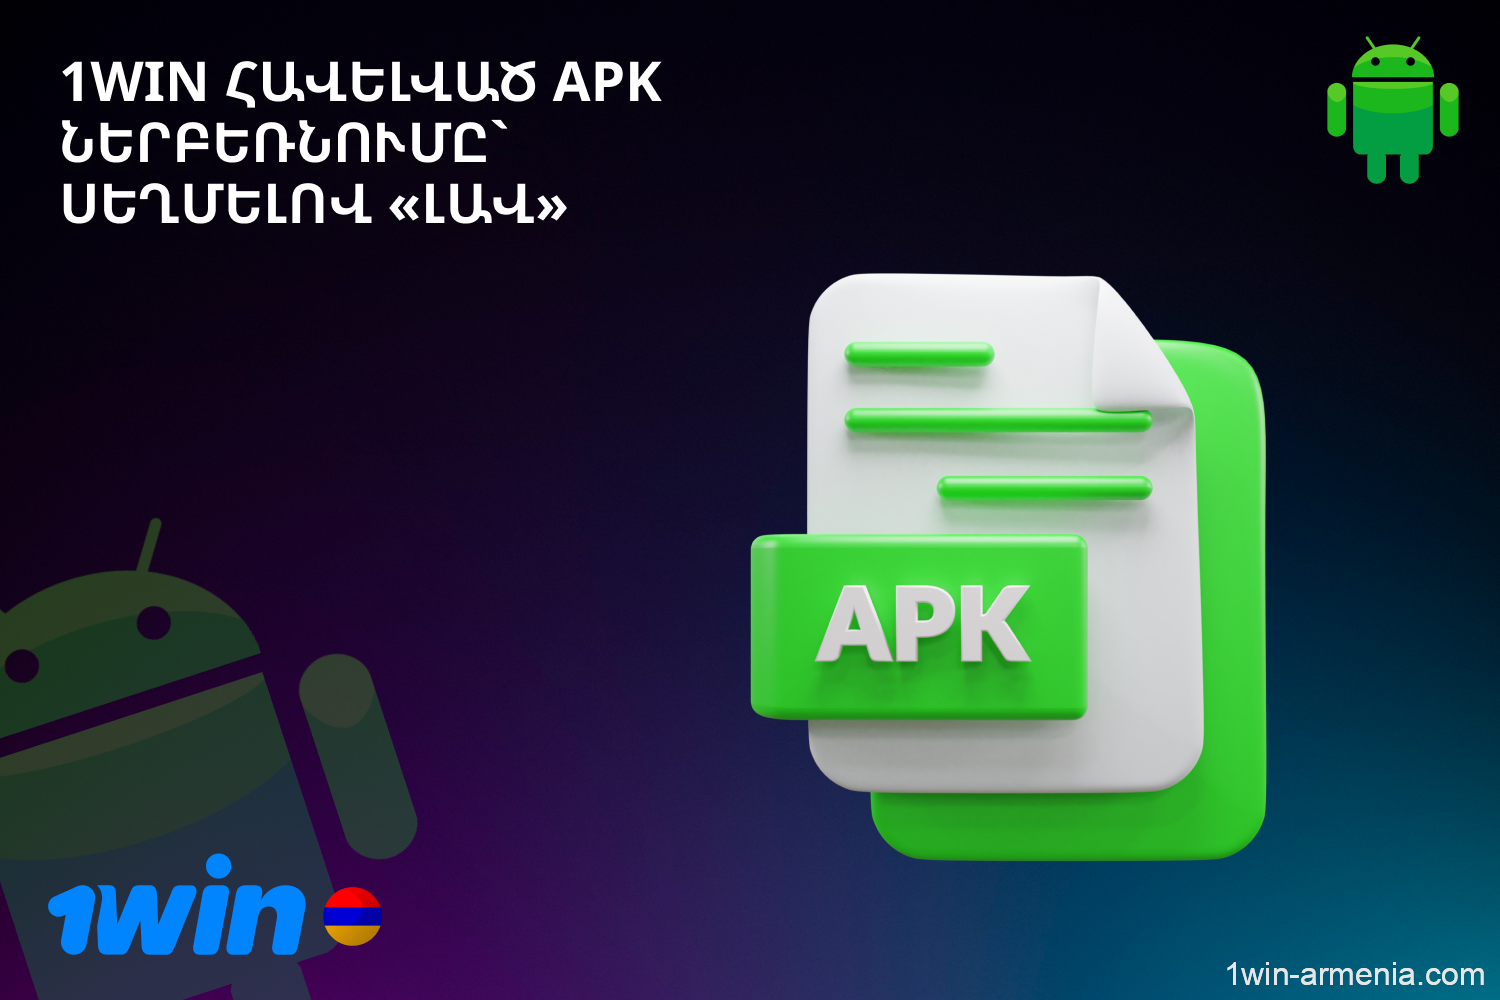 Armenian players need to confirm the download of 1win APK file by clicking "OK"